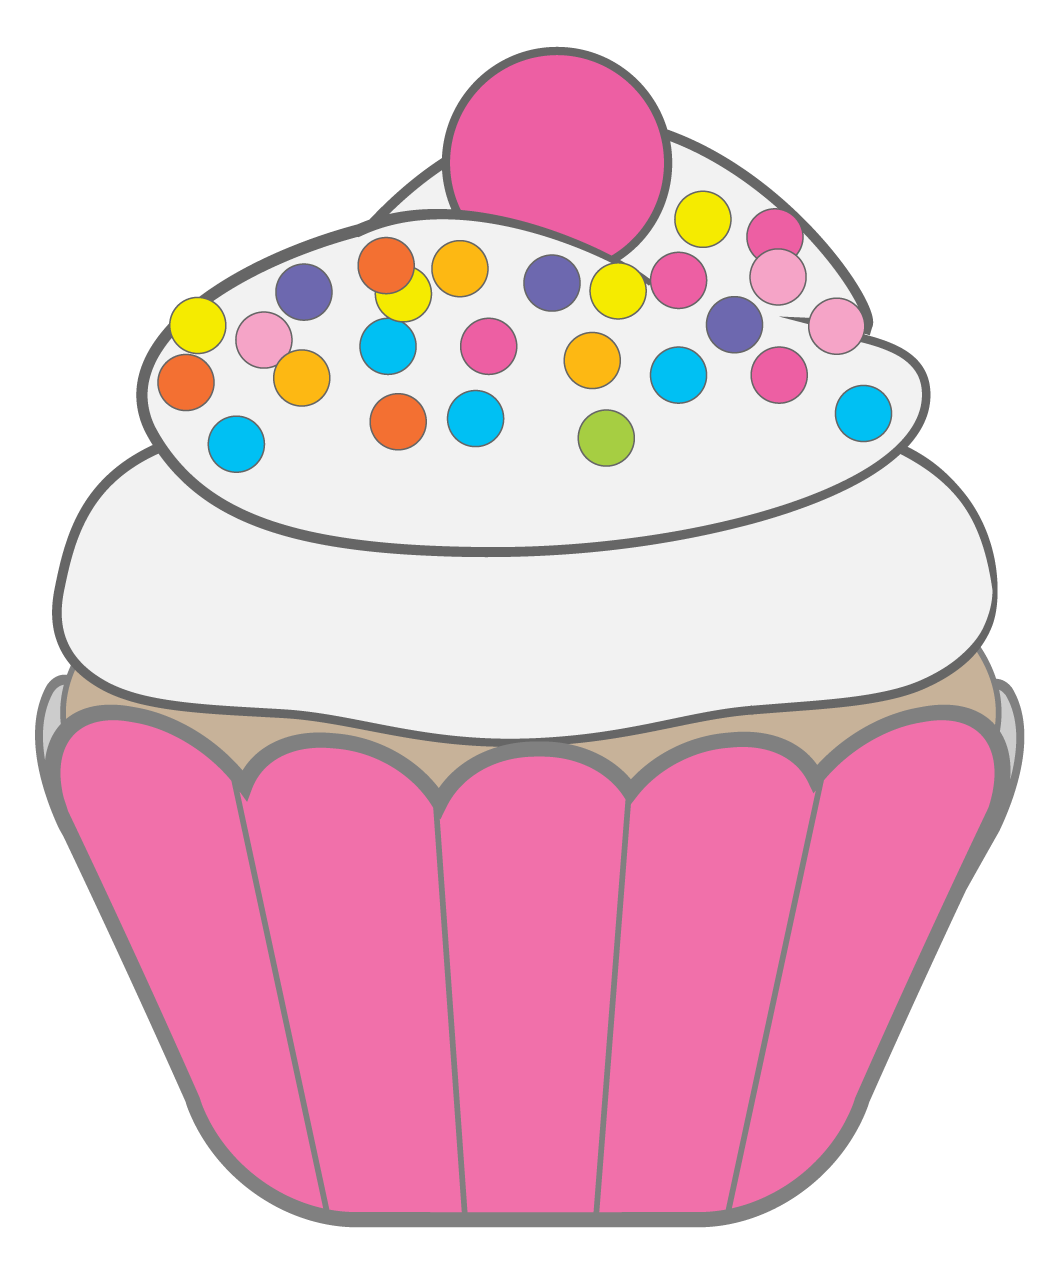 Free january cupcake cliparts. One clipart cute